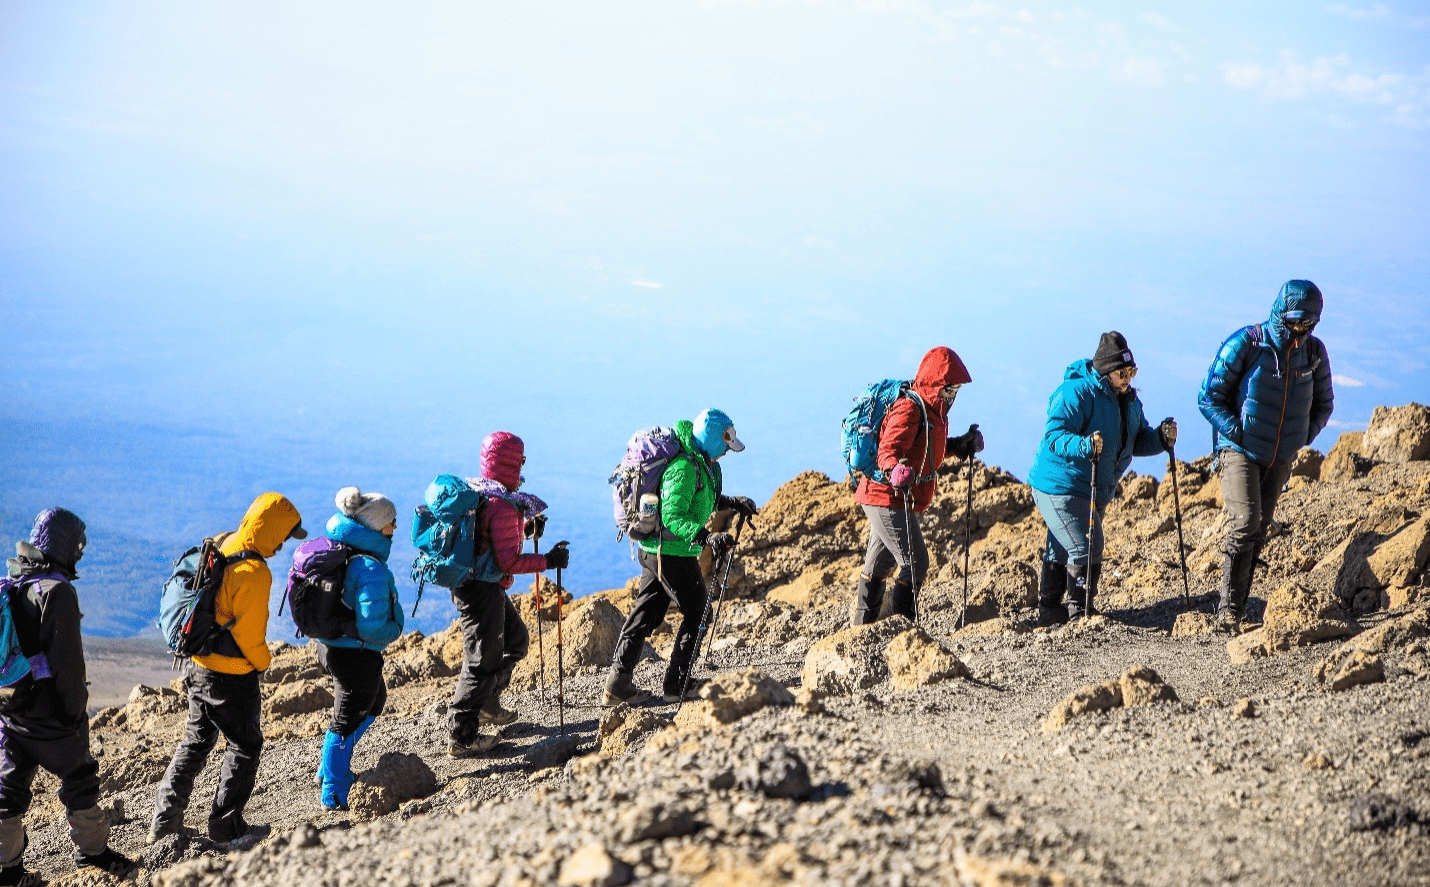 A group of people trekking